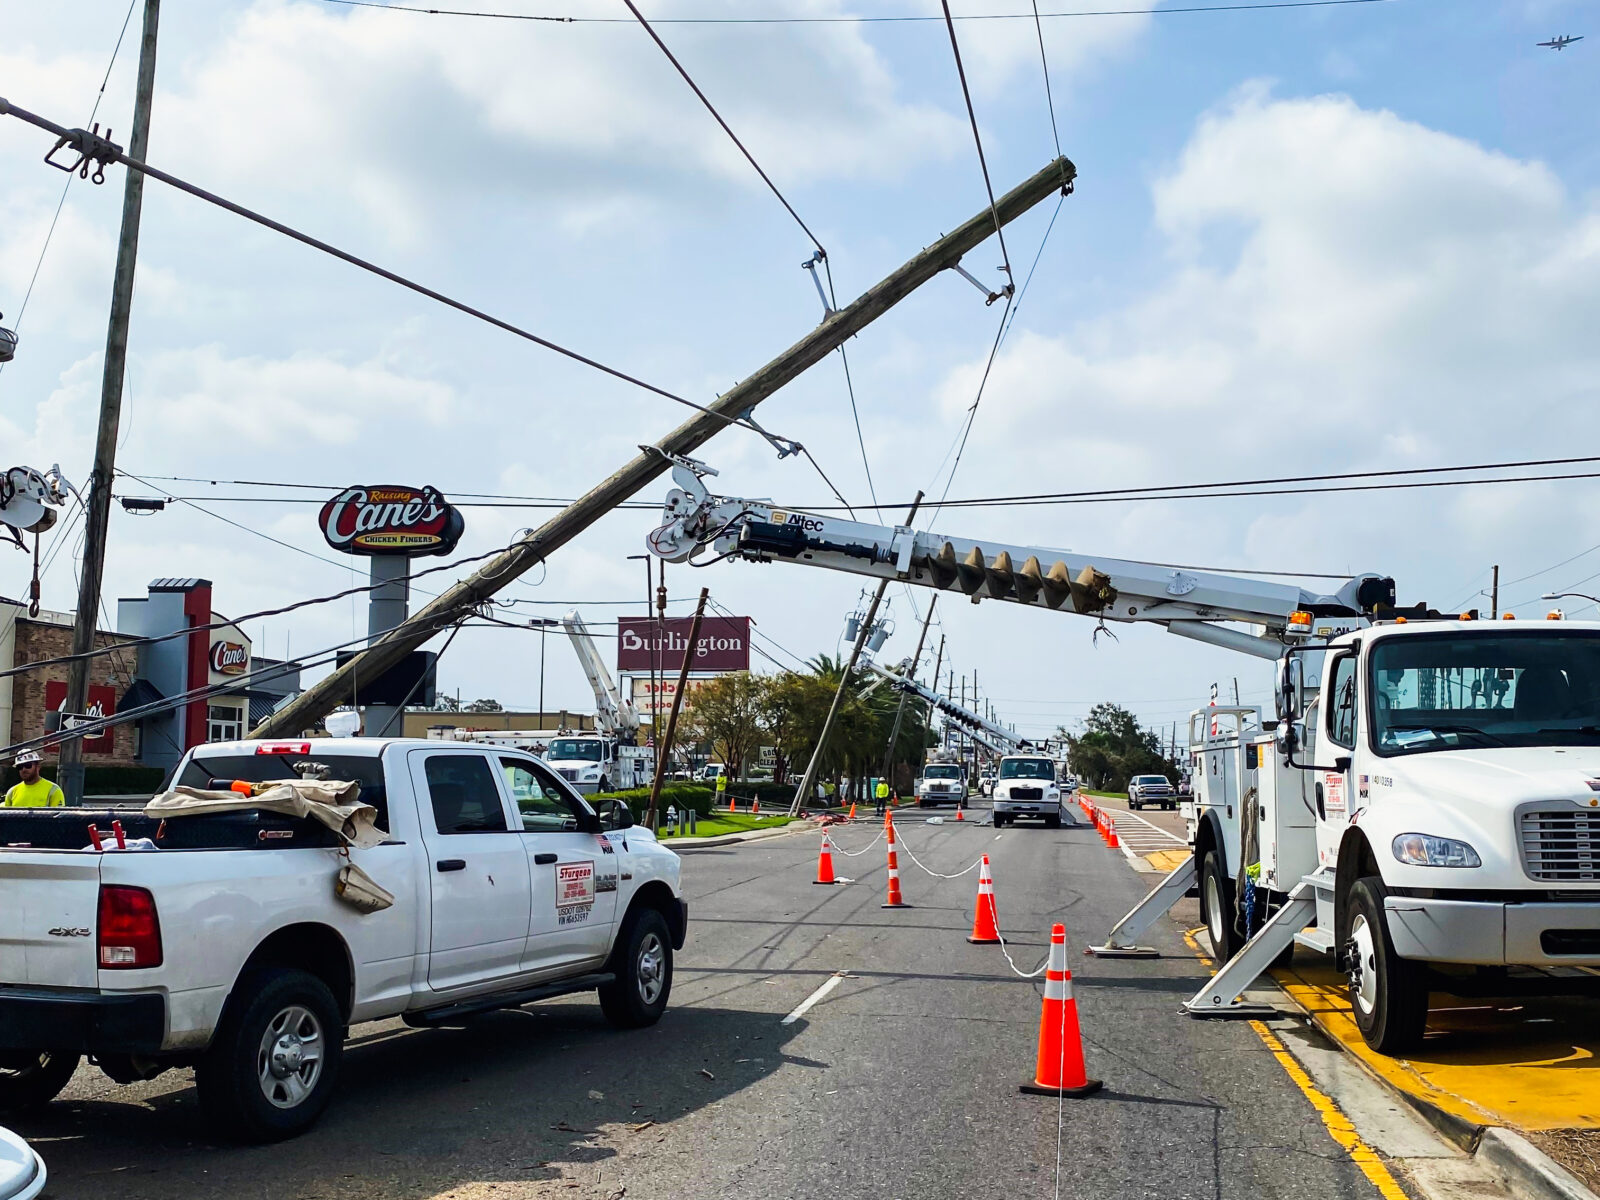 Restoration workers fixing power lines using trucks with cranes